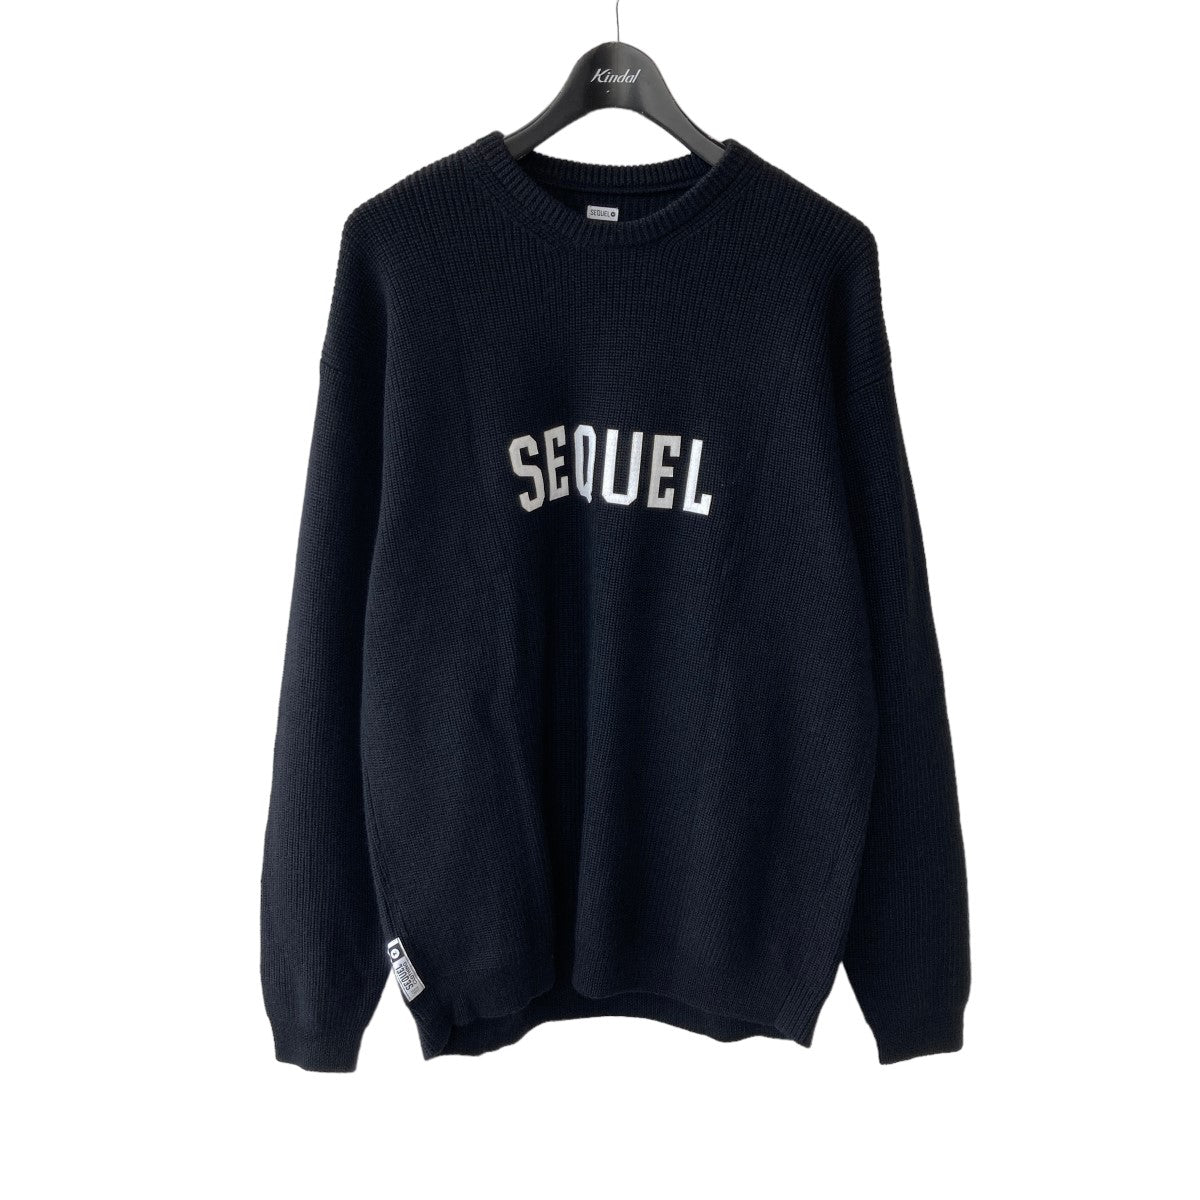 SEQUEL 22AW CREW NECK KNIT SQ-22AW-KN-02fragment